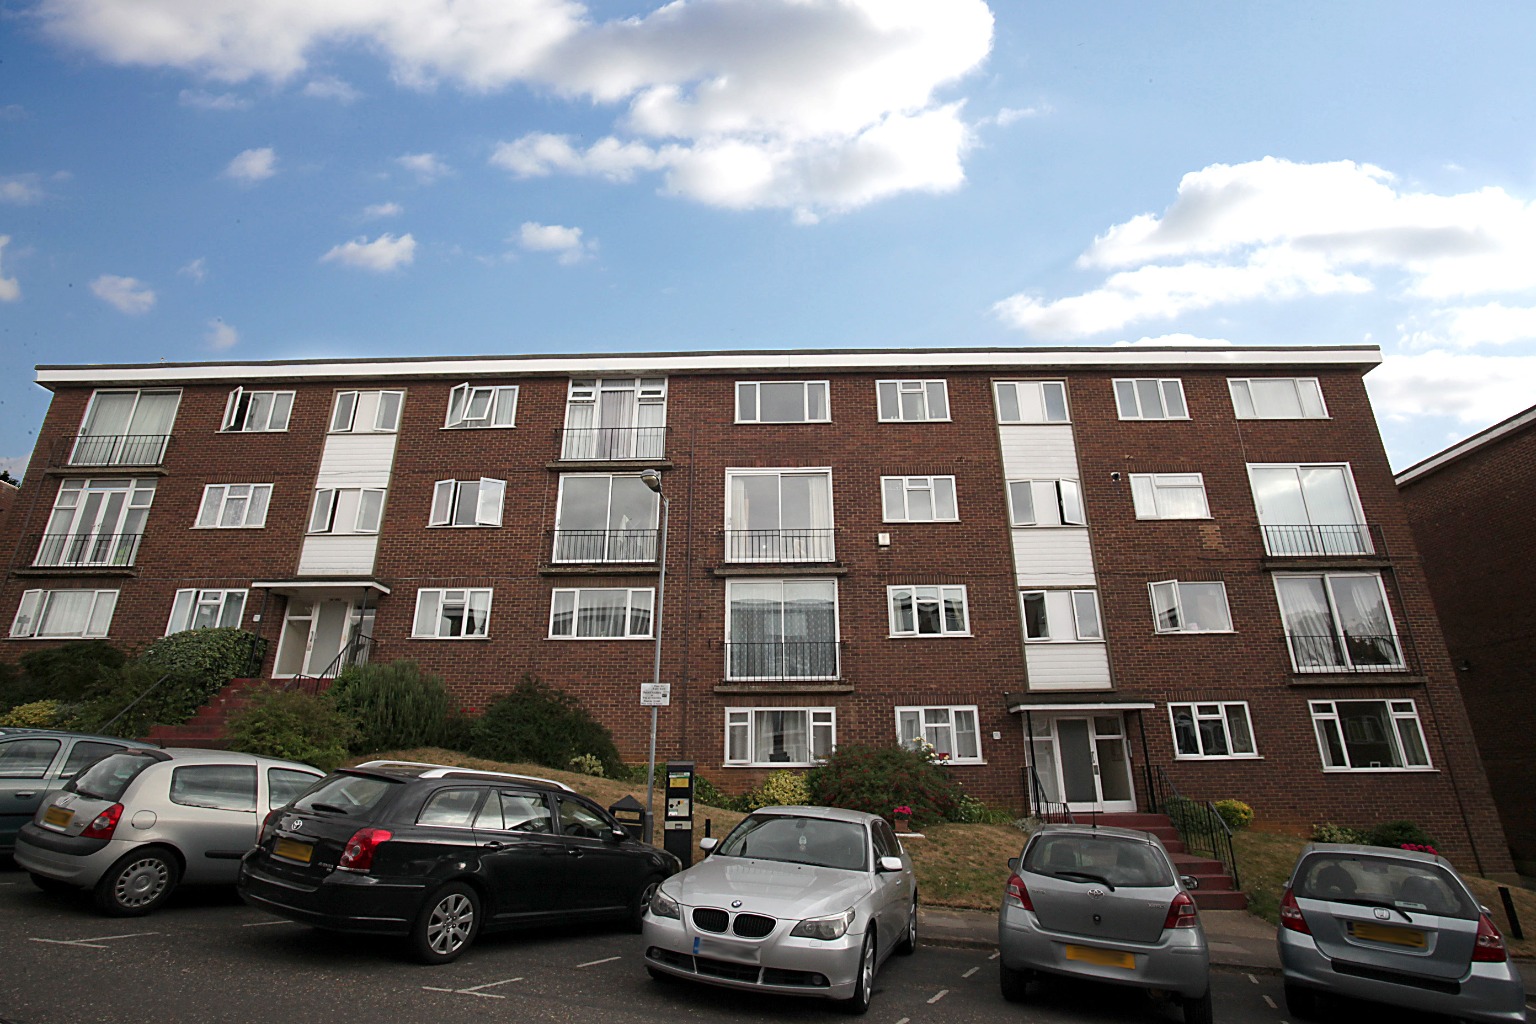 2 bed flat for sale in The Larches, Bedfordshire, LU2 